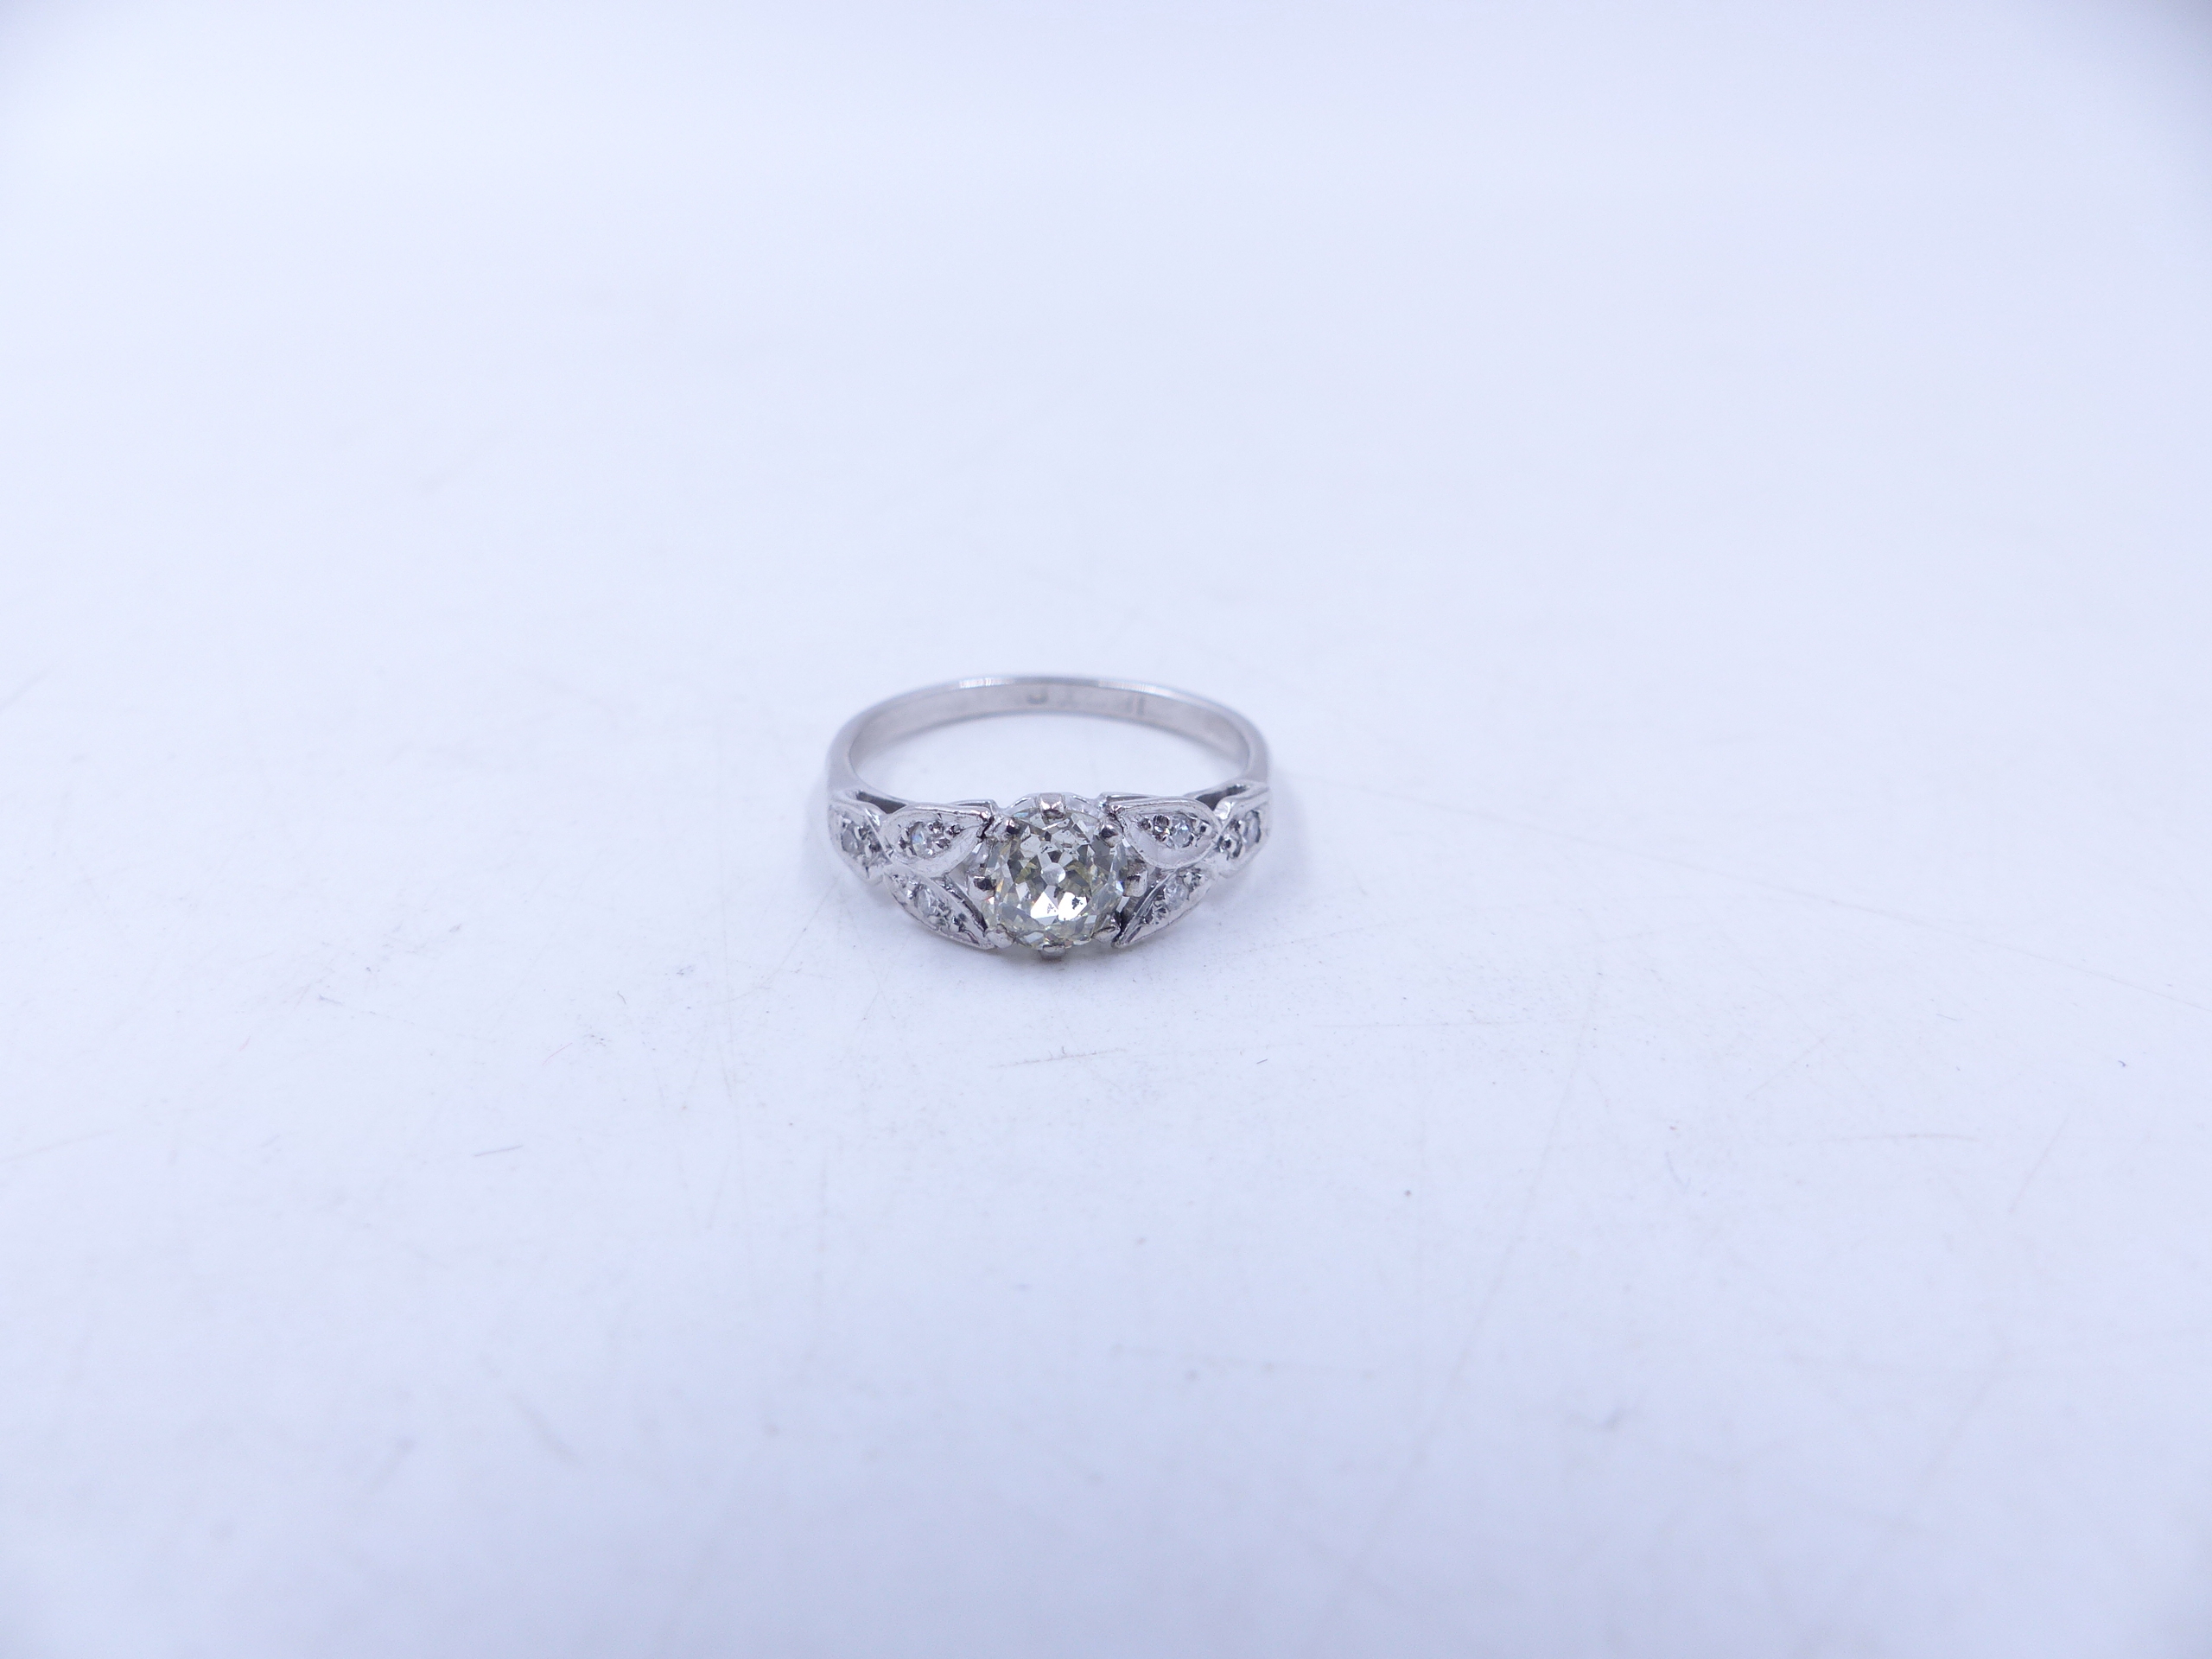 AN 18ct STAMPED OLD CUT DIAMOND RING. THE CENTRAL OLD CUT DIAMOND IS HELD IN AN EIGHT CLAW SETTING - Image 11 of 14